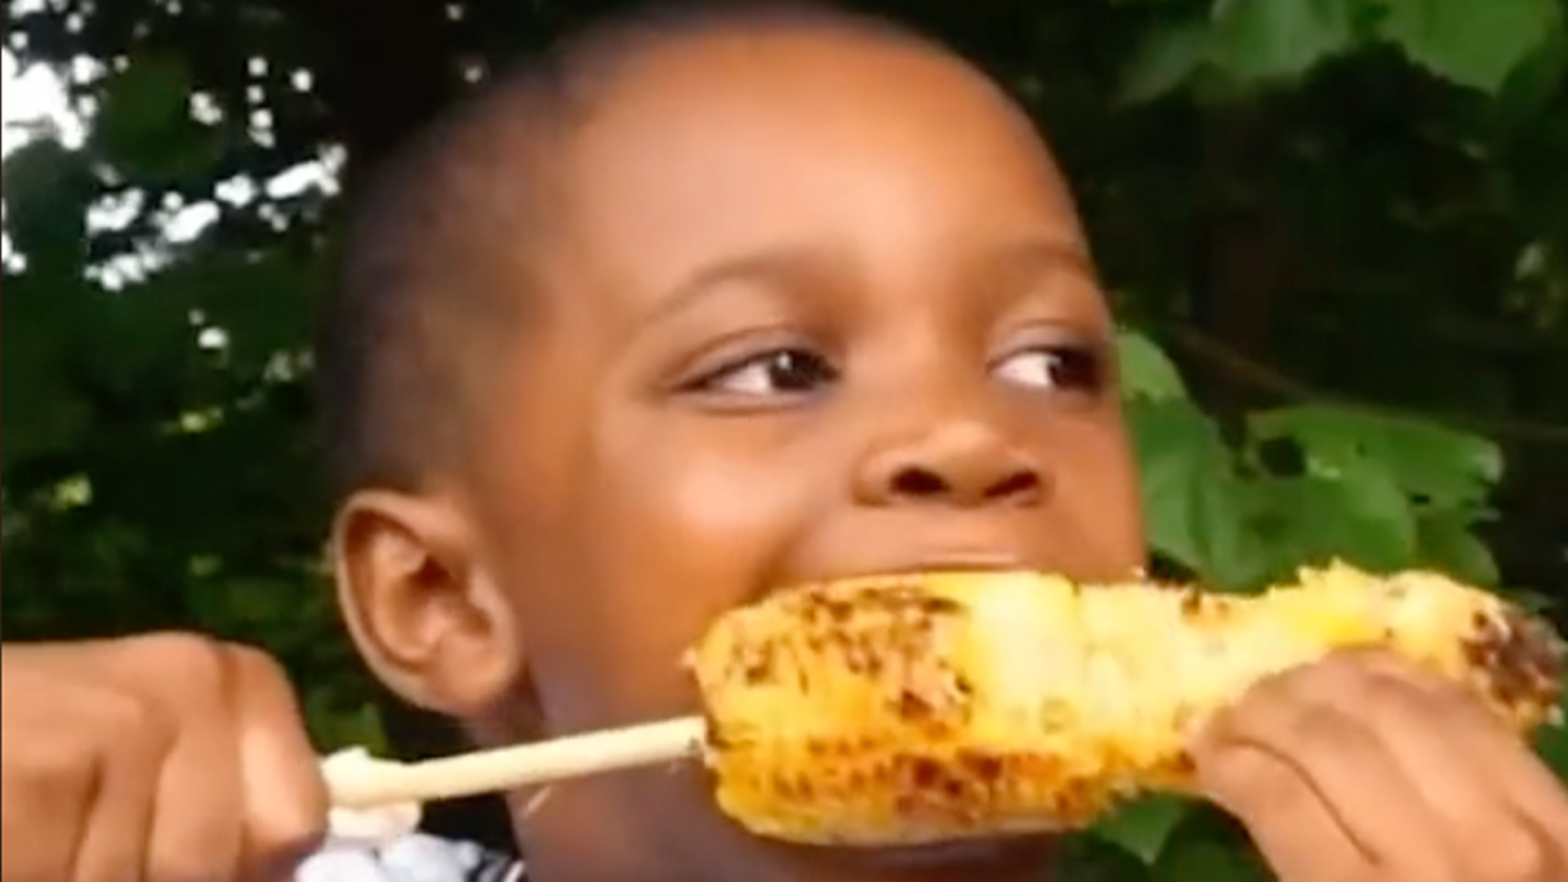 The 'Corn Kid' Is A Viral Sensation And Has Already Made A Cameo With Chipotle, But What's His Fee? A Starting $200